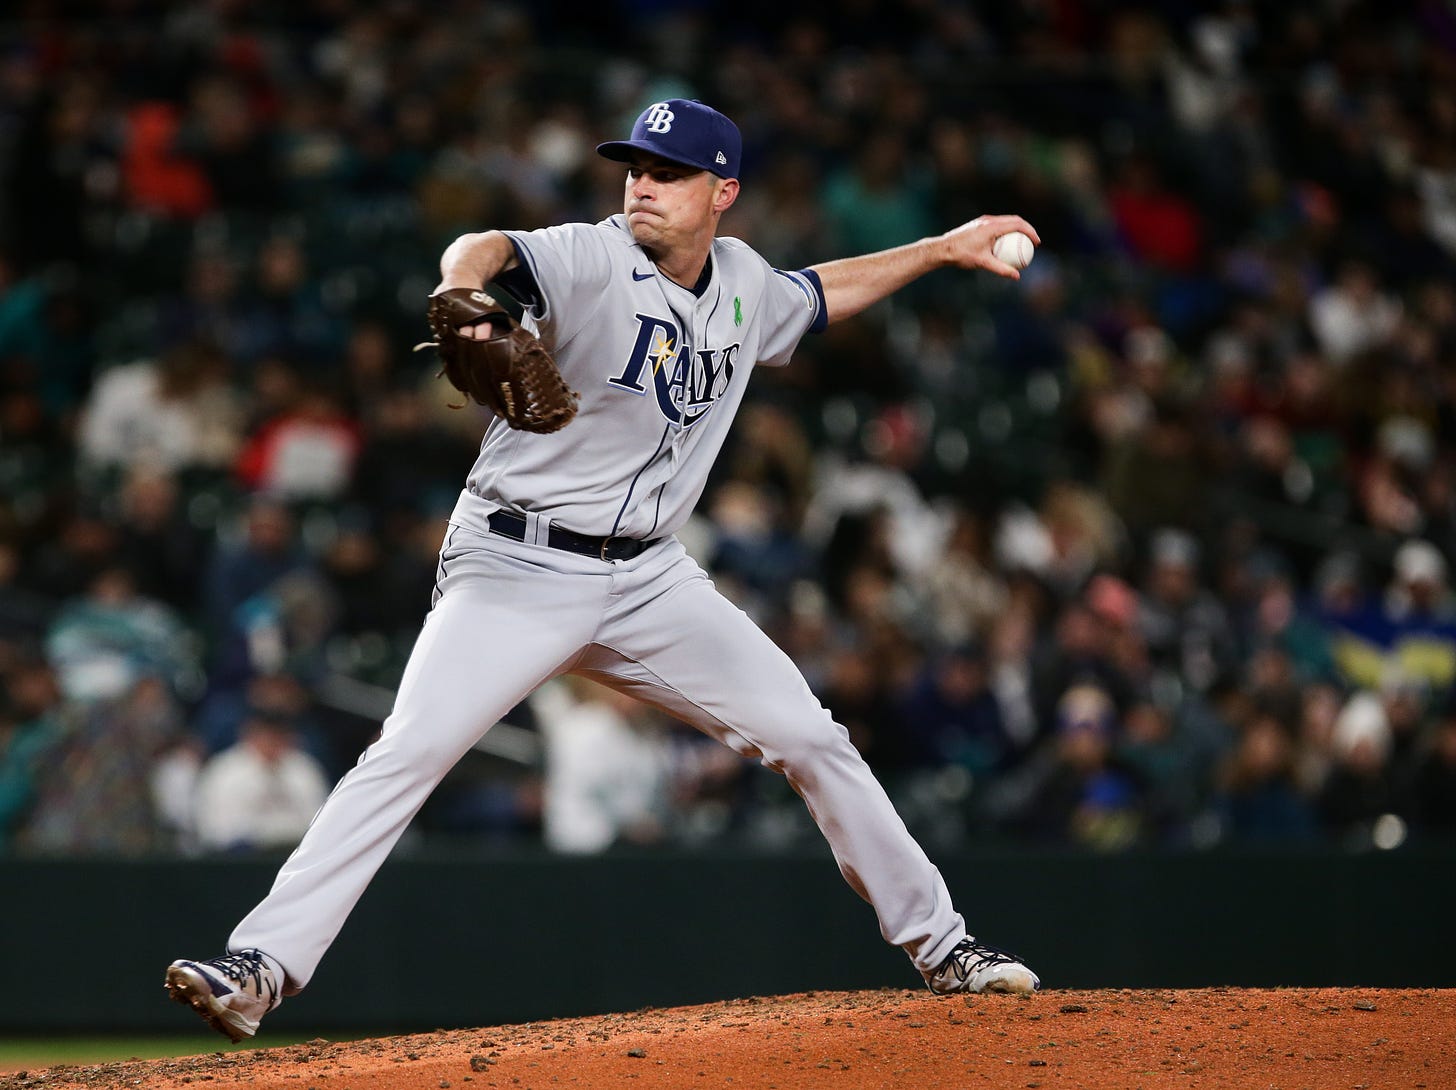 Mets fill a big bullpen need - acquire LHP Brooks Raley from the Rays